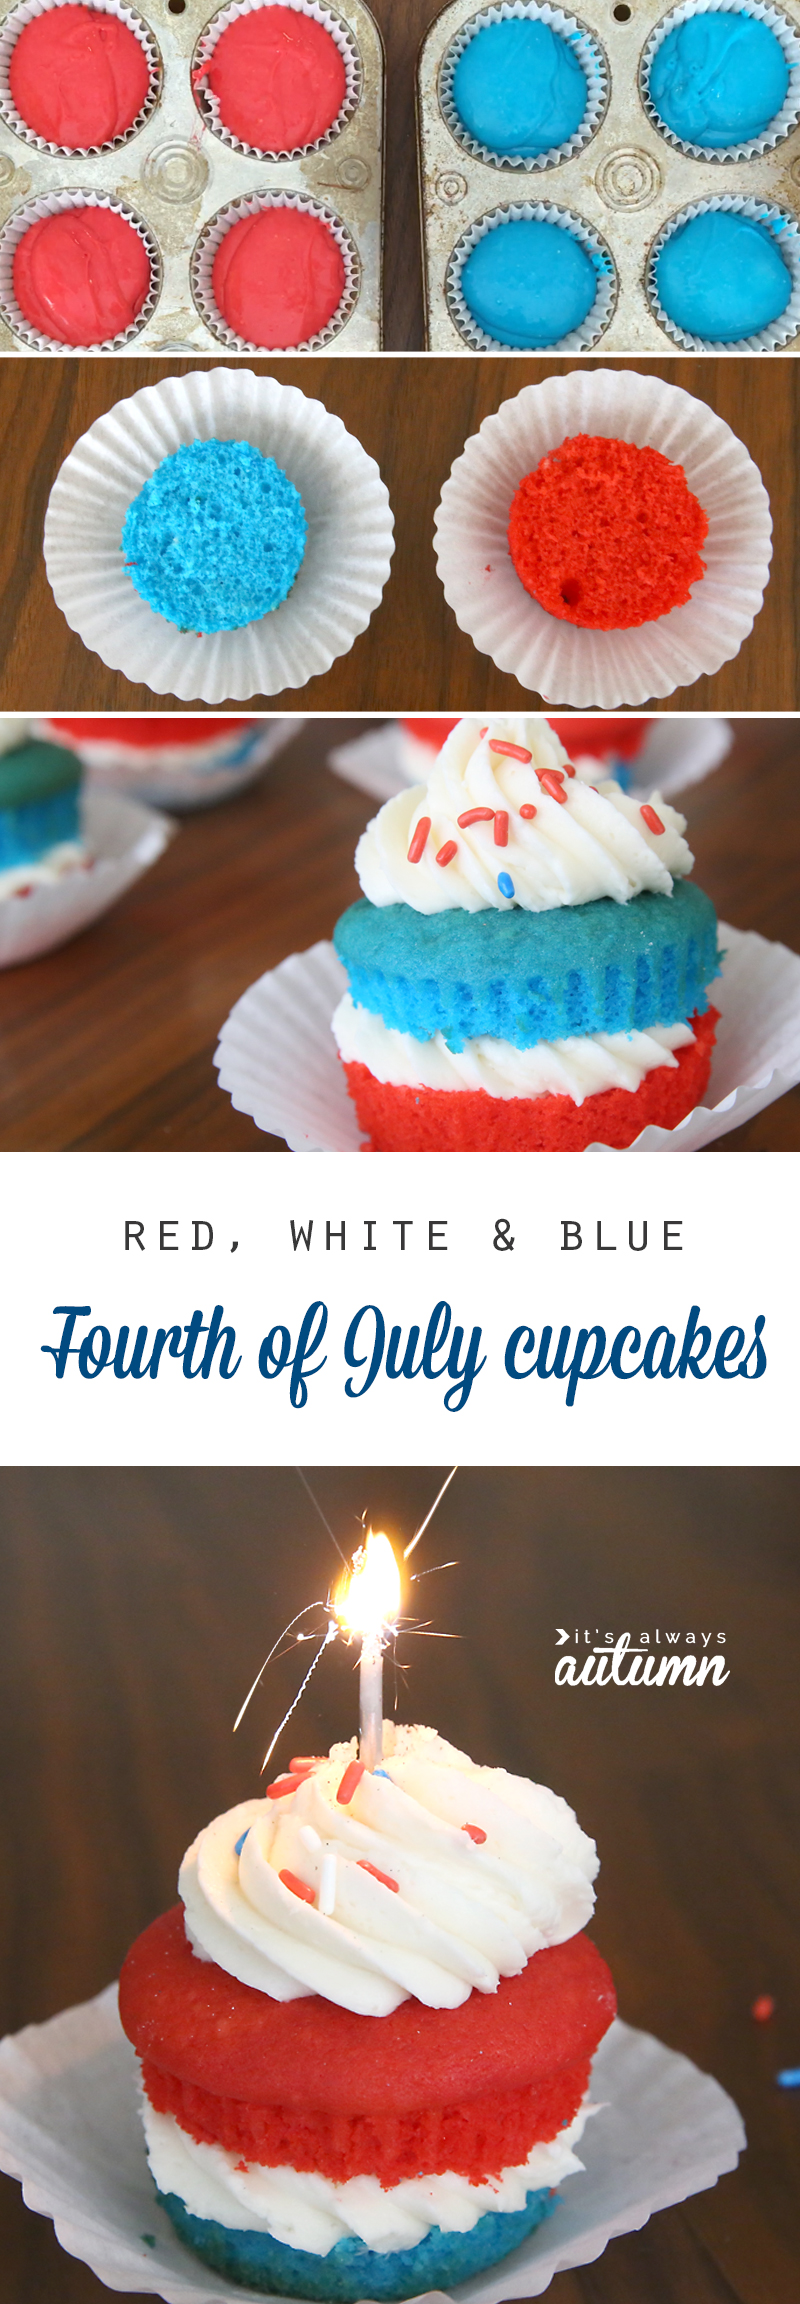 Red white and blue cupcakes for the 4th of July - layers of red and blue cake and white frosting